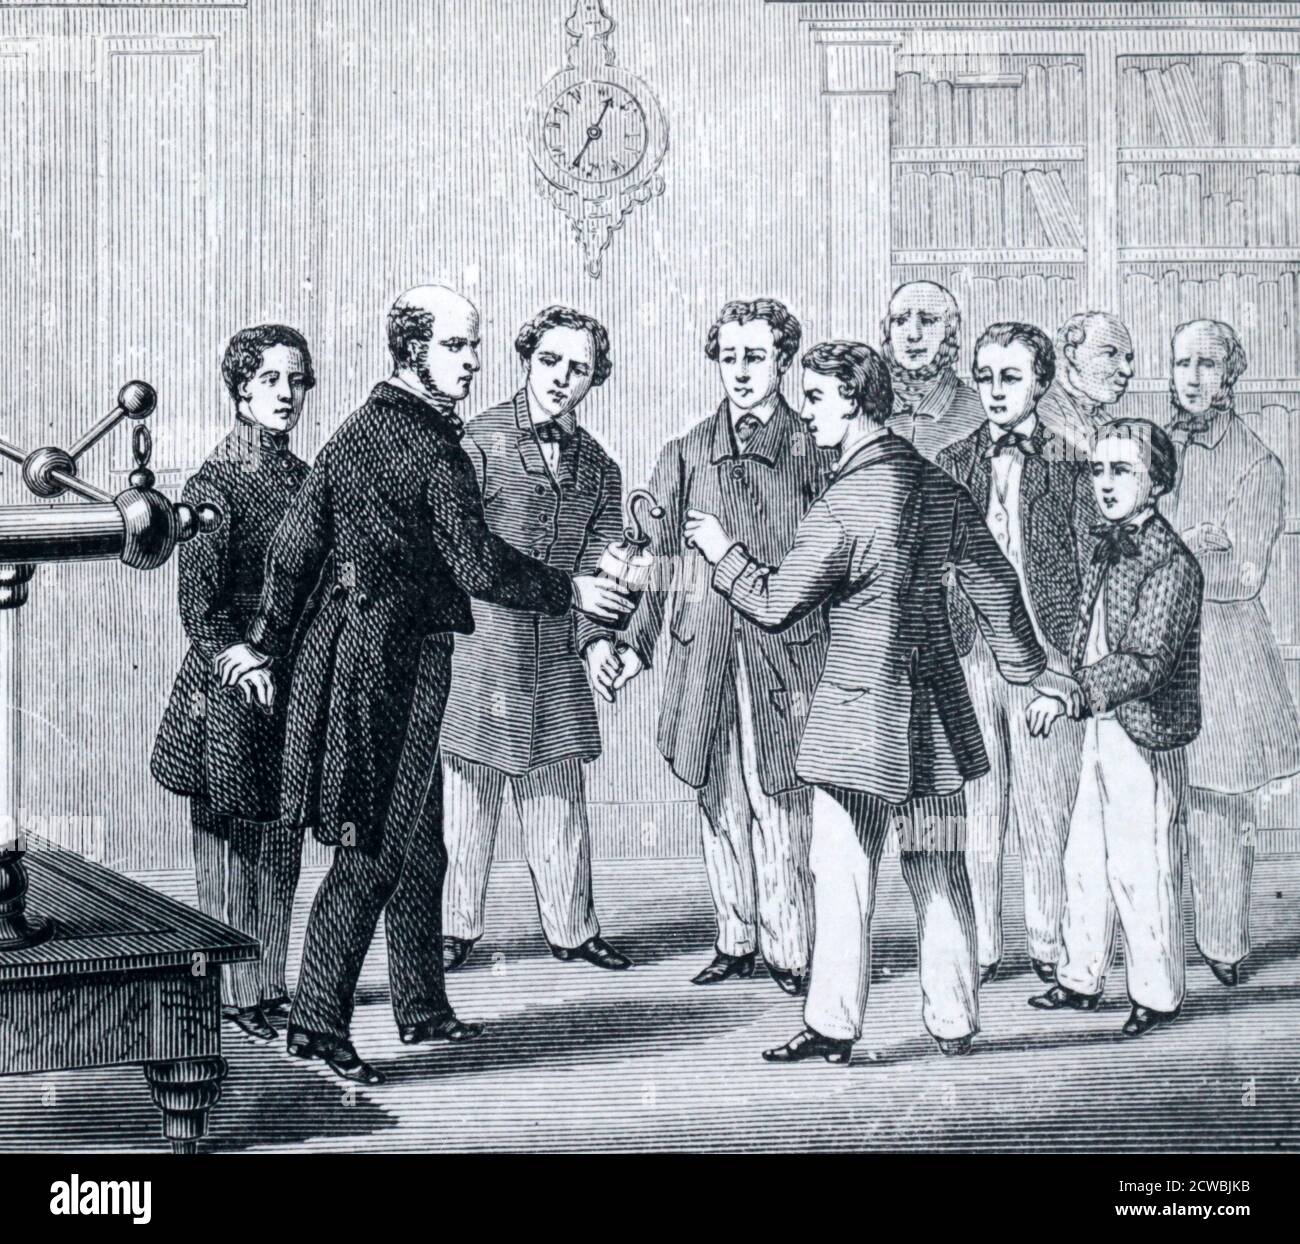 Engraving depicting the process of sending an electric shock through a circle of people. One person holds a charged Leyden jar by the outside coating and the person next to him touches the knob, sending a shock through the whole circle. Stock Photo